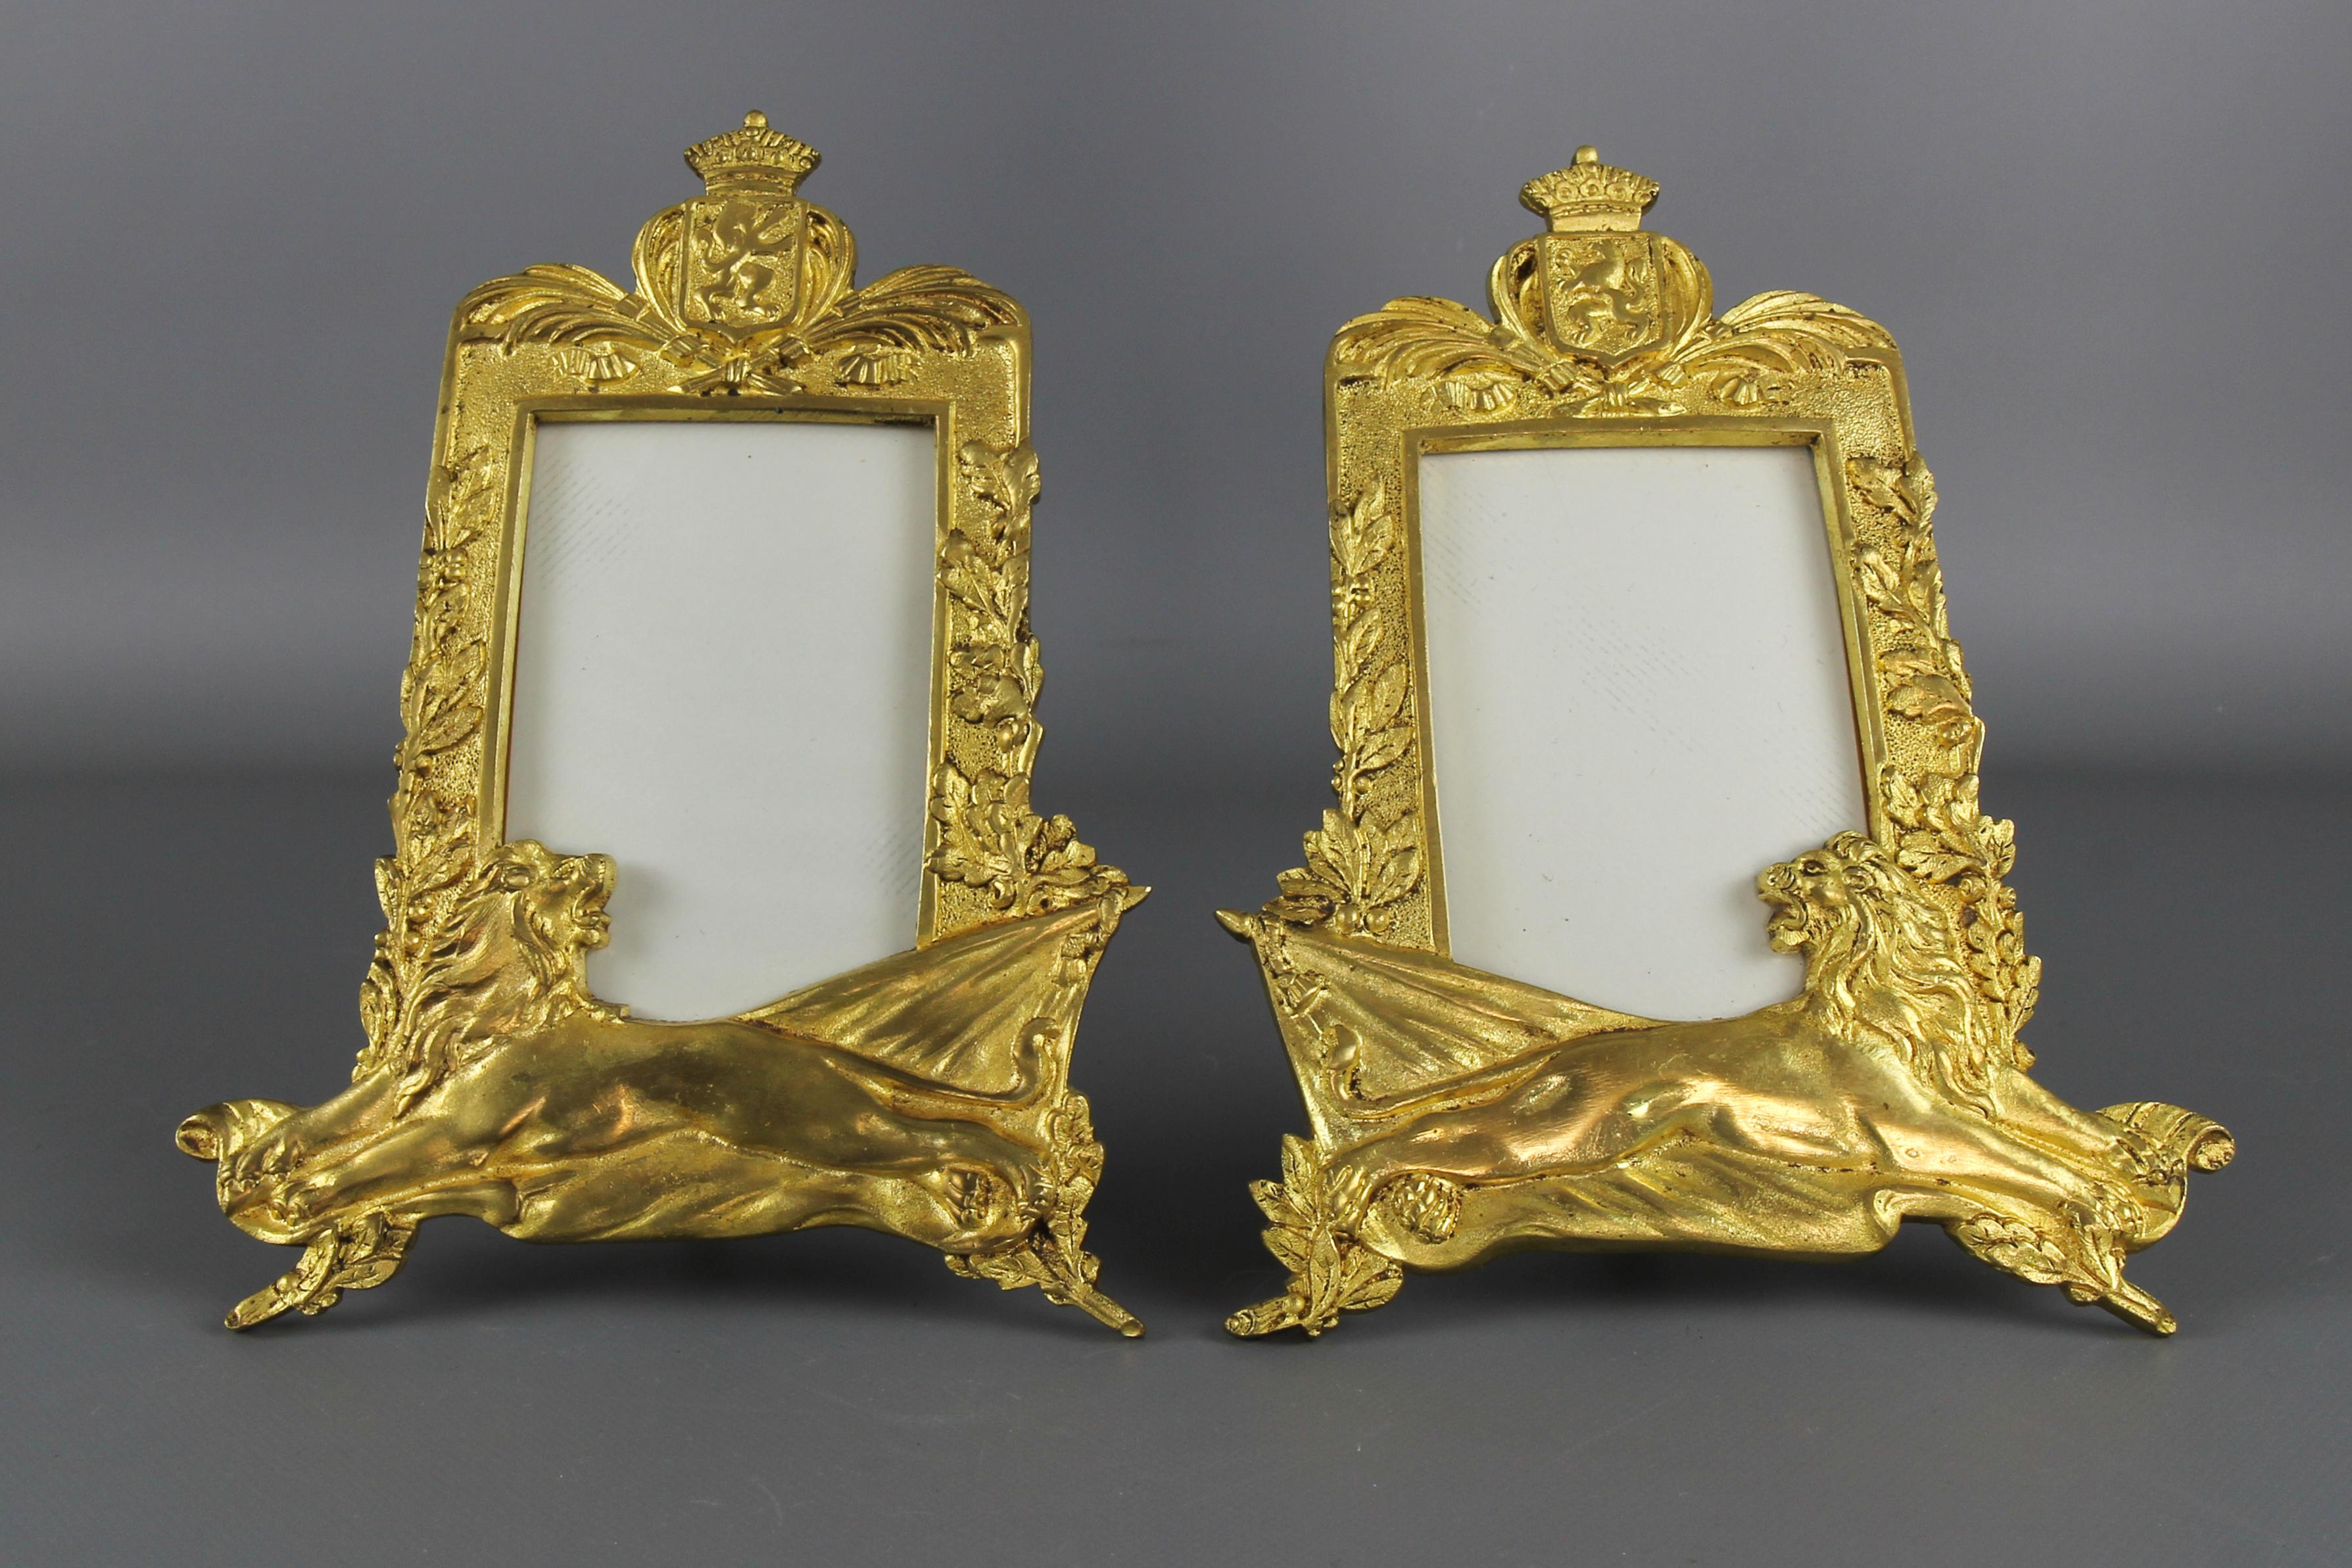 Pair of gilt bronze picture photo frames with lions and royal crowns, Belgium, circa the 1930s.
A magnificent pair of gilt bronze table photo or picture frames. These beautiful frames feature heraldic lions and a coat of arms of Belgium that bears